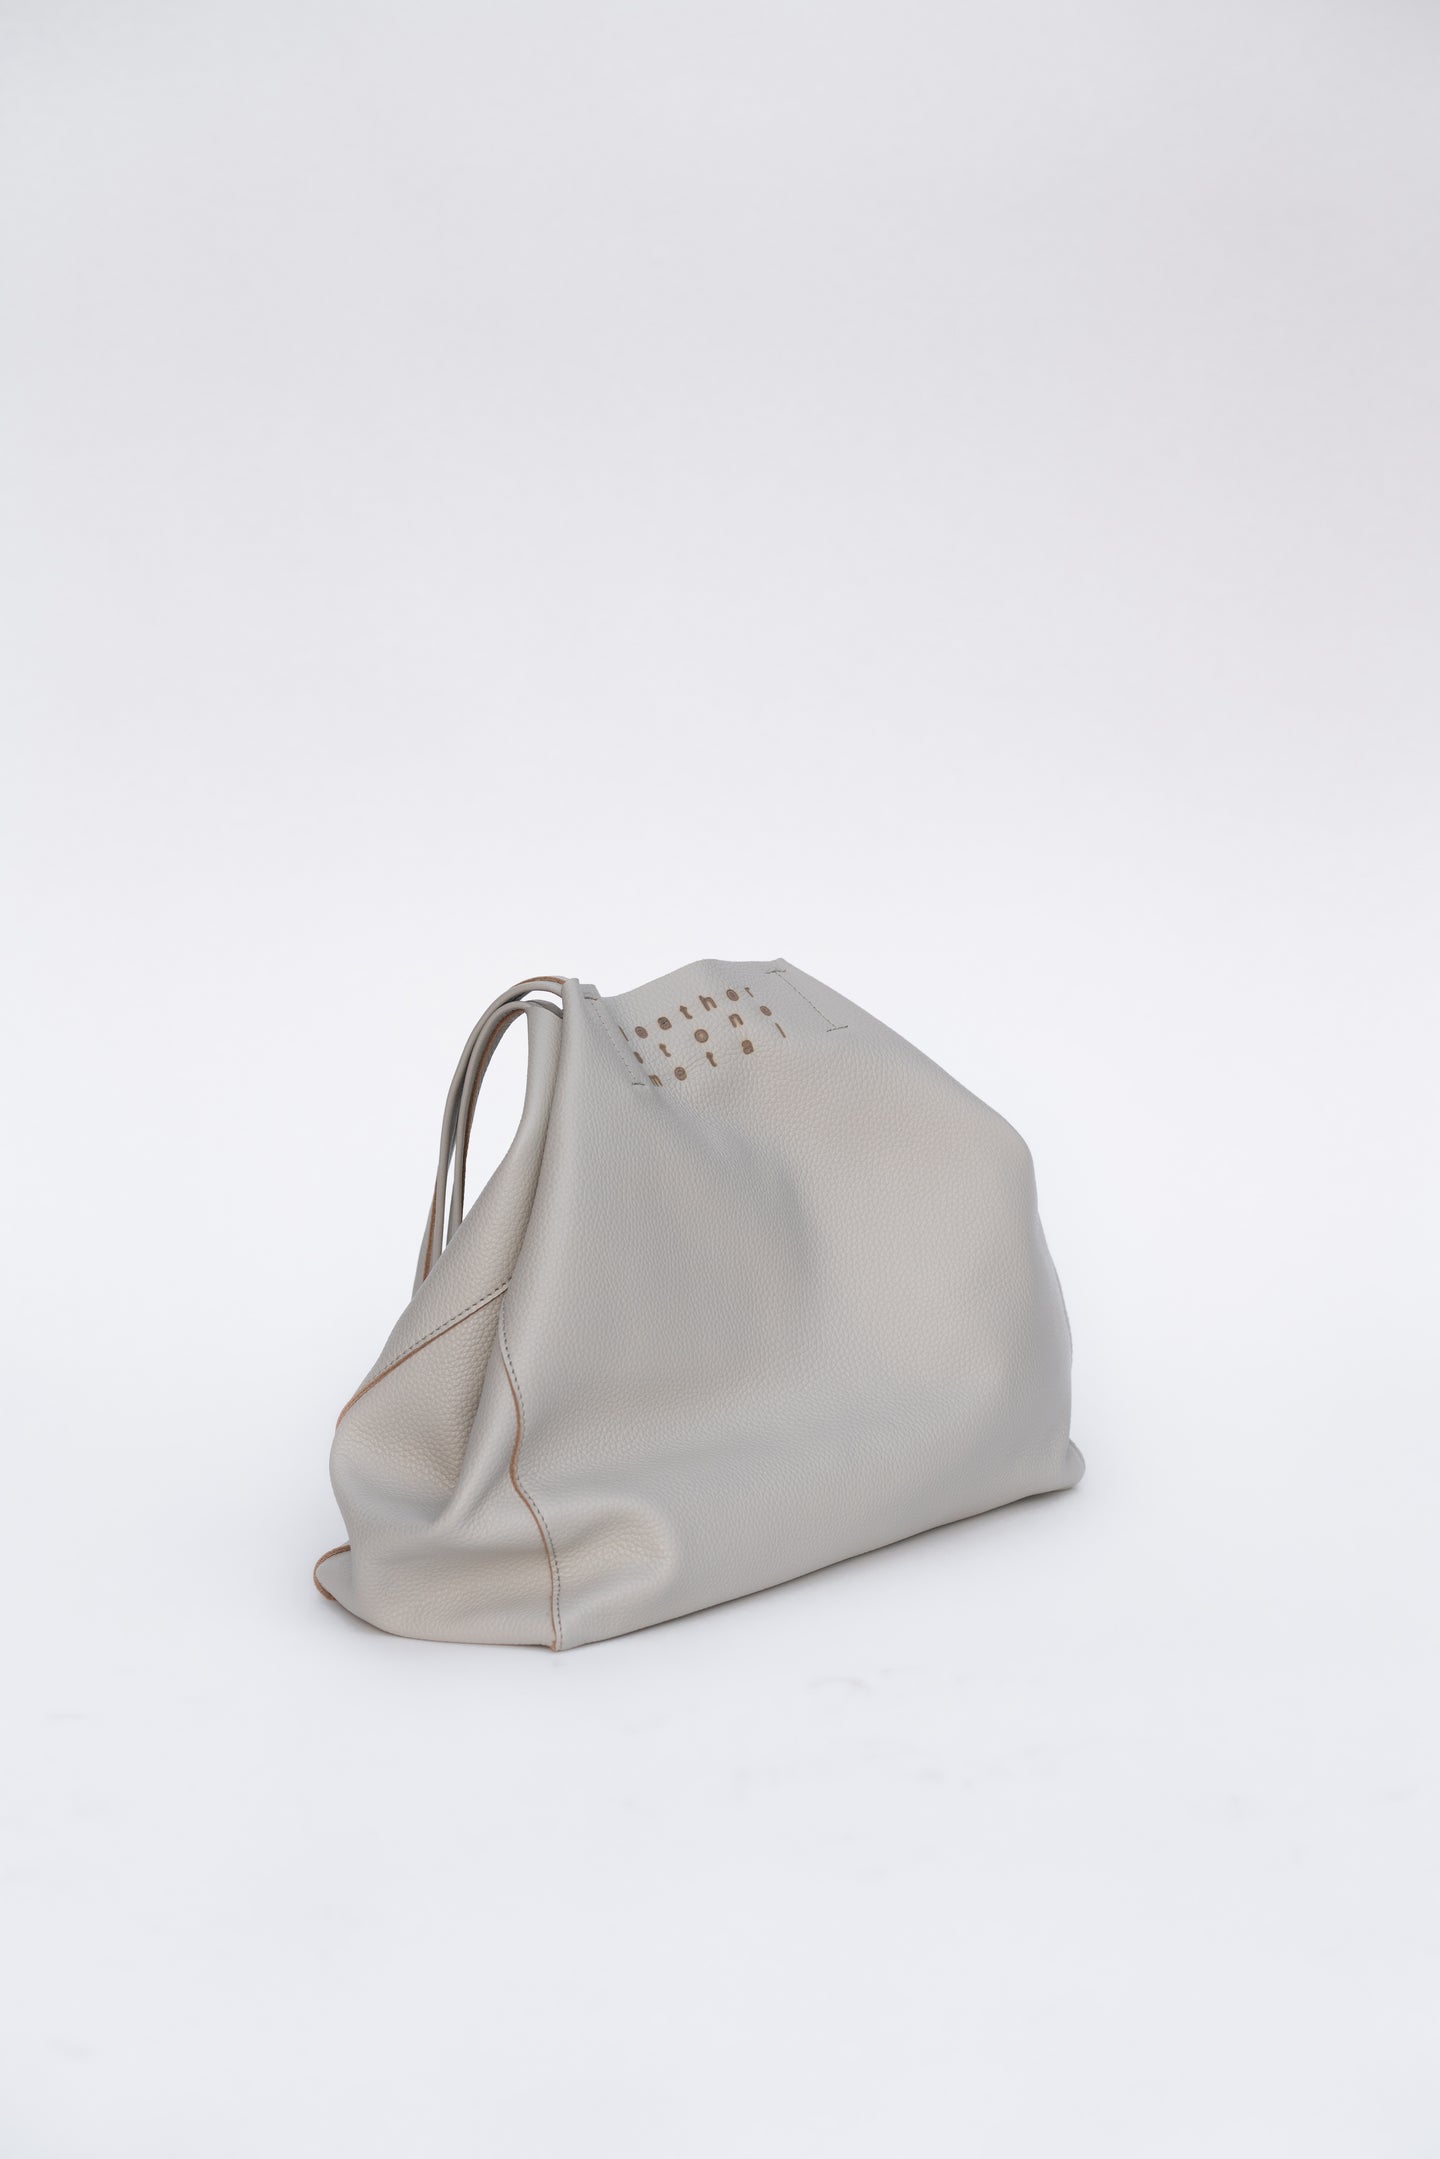 Ivory Leather Tote